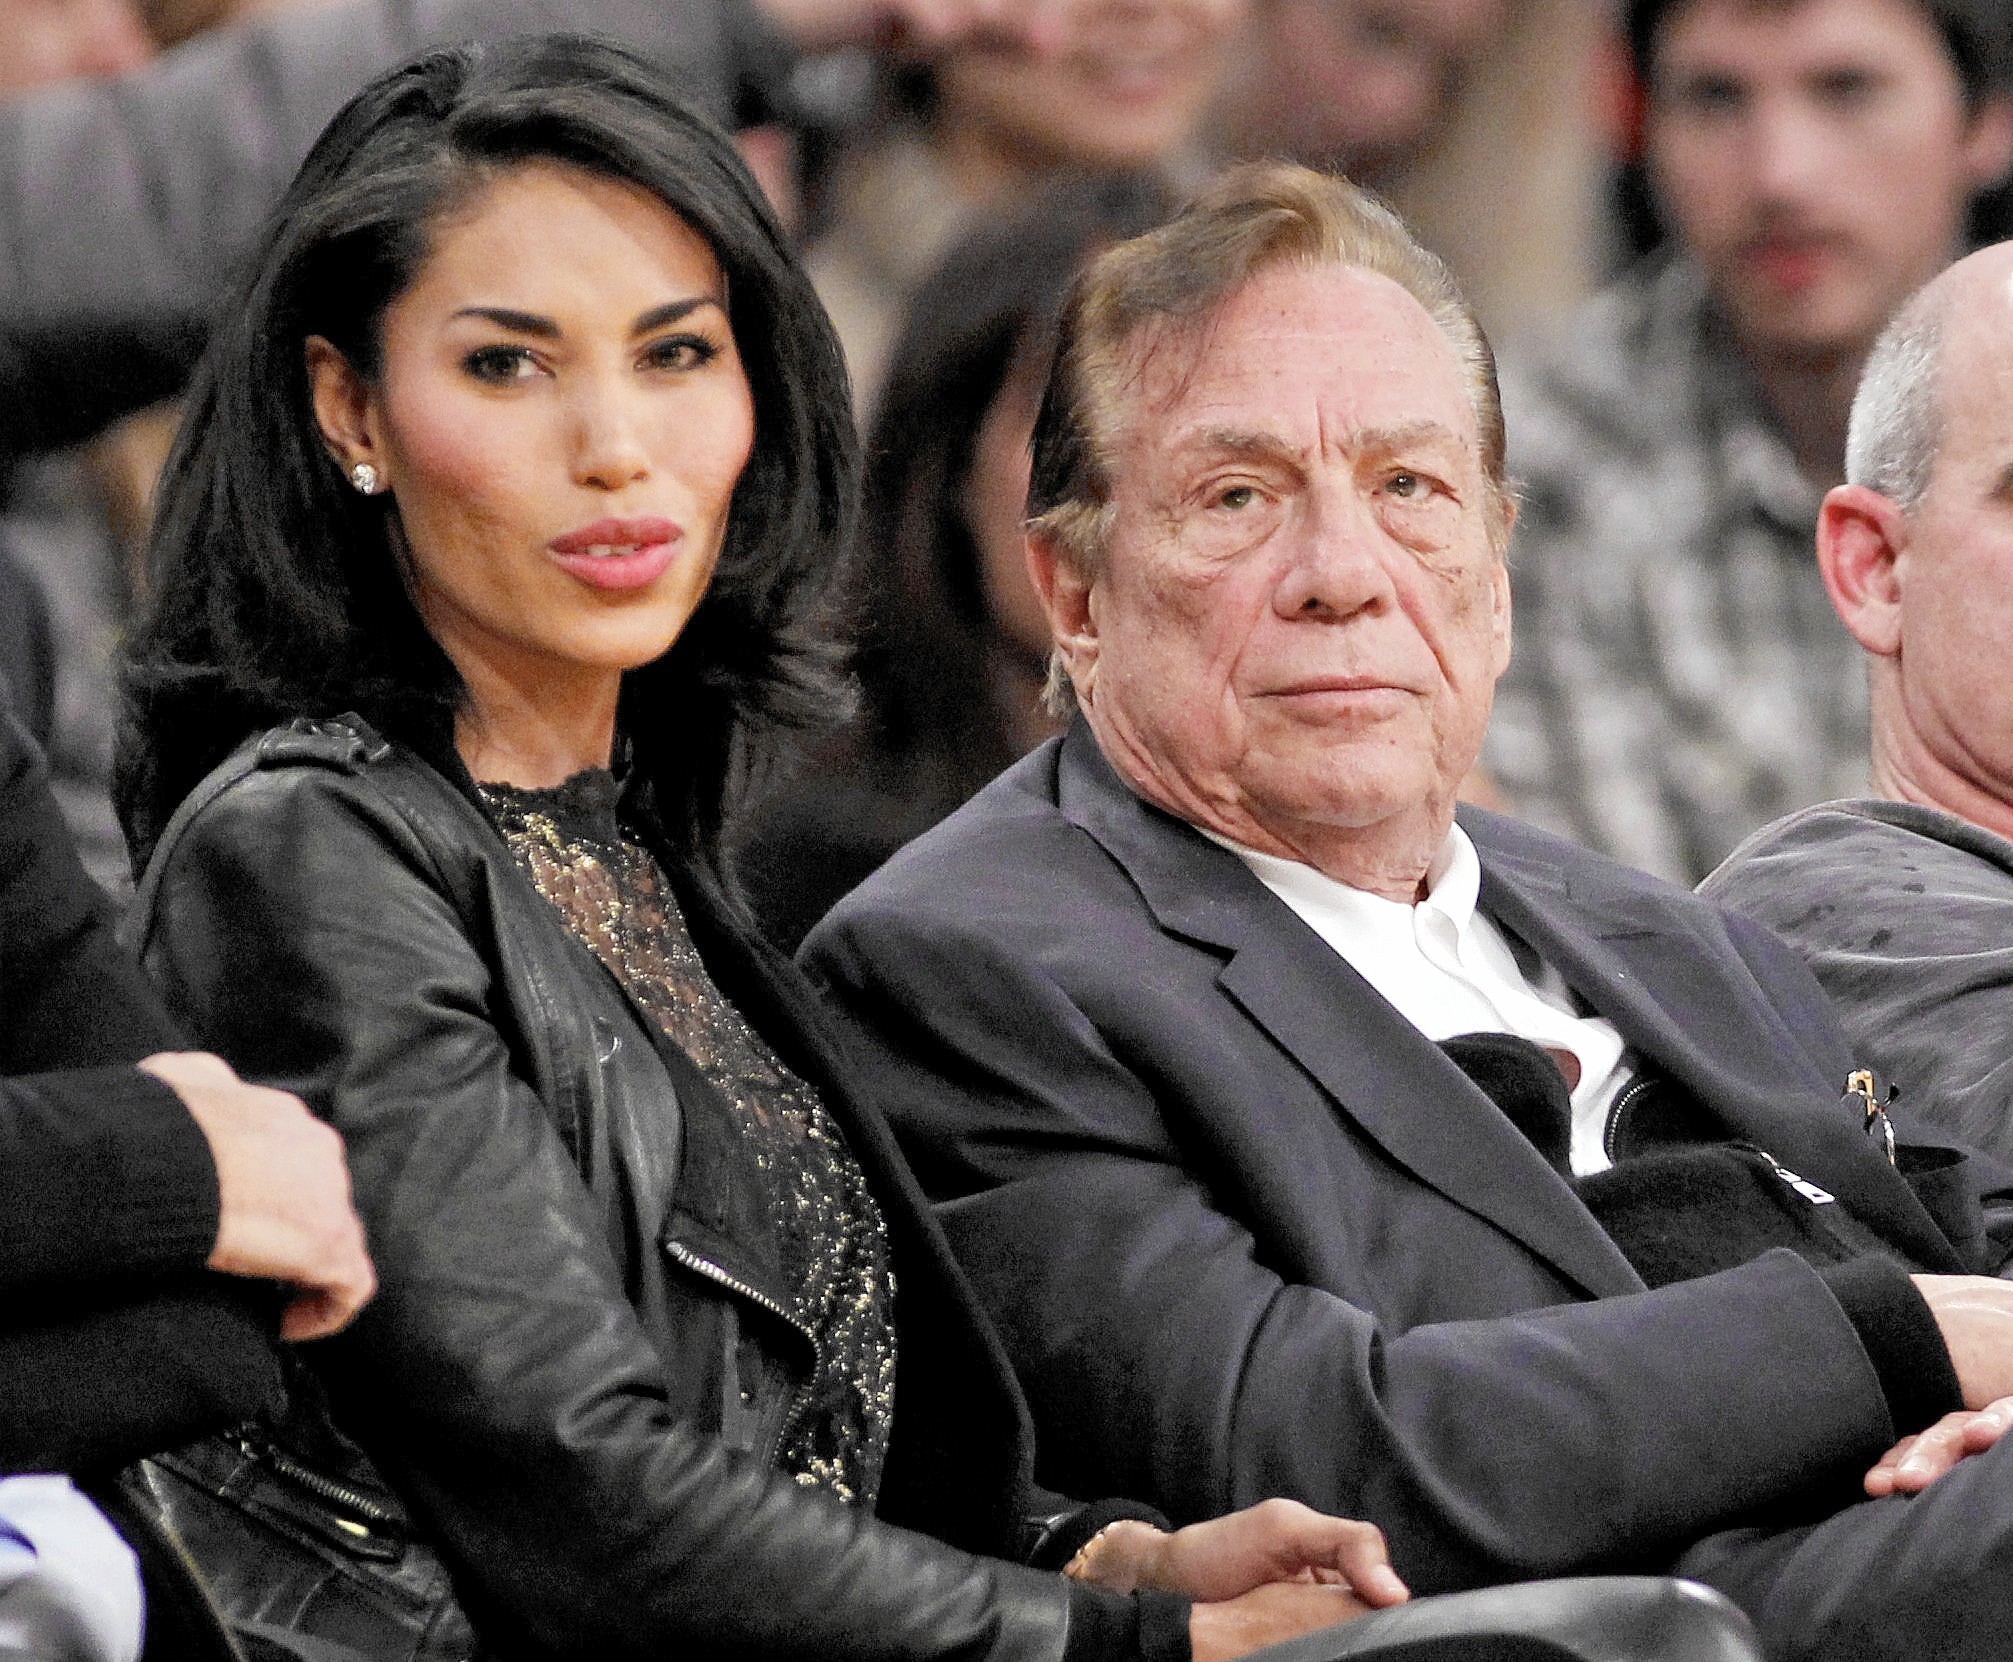 Recording could come back to bite Donald Sterling girlfriend - Chicago Tribune